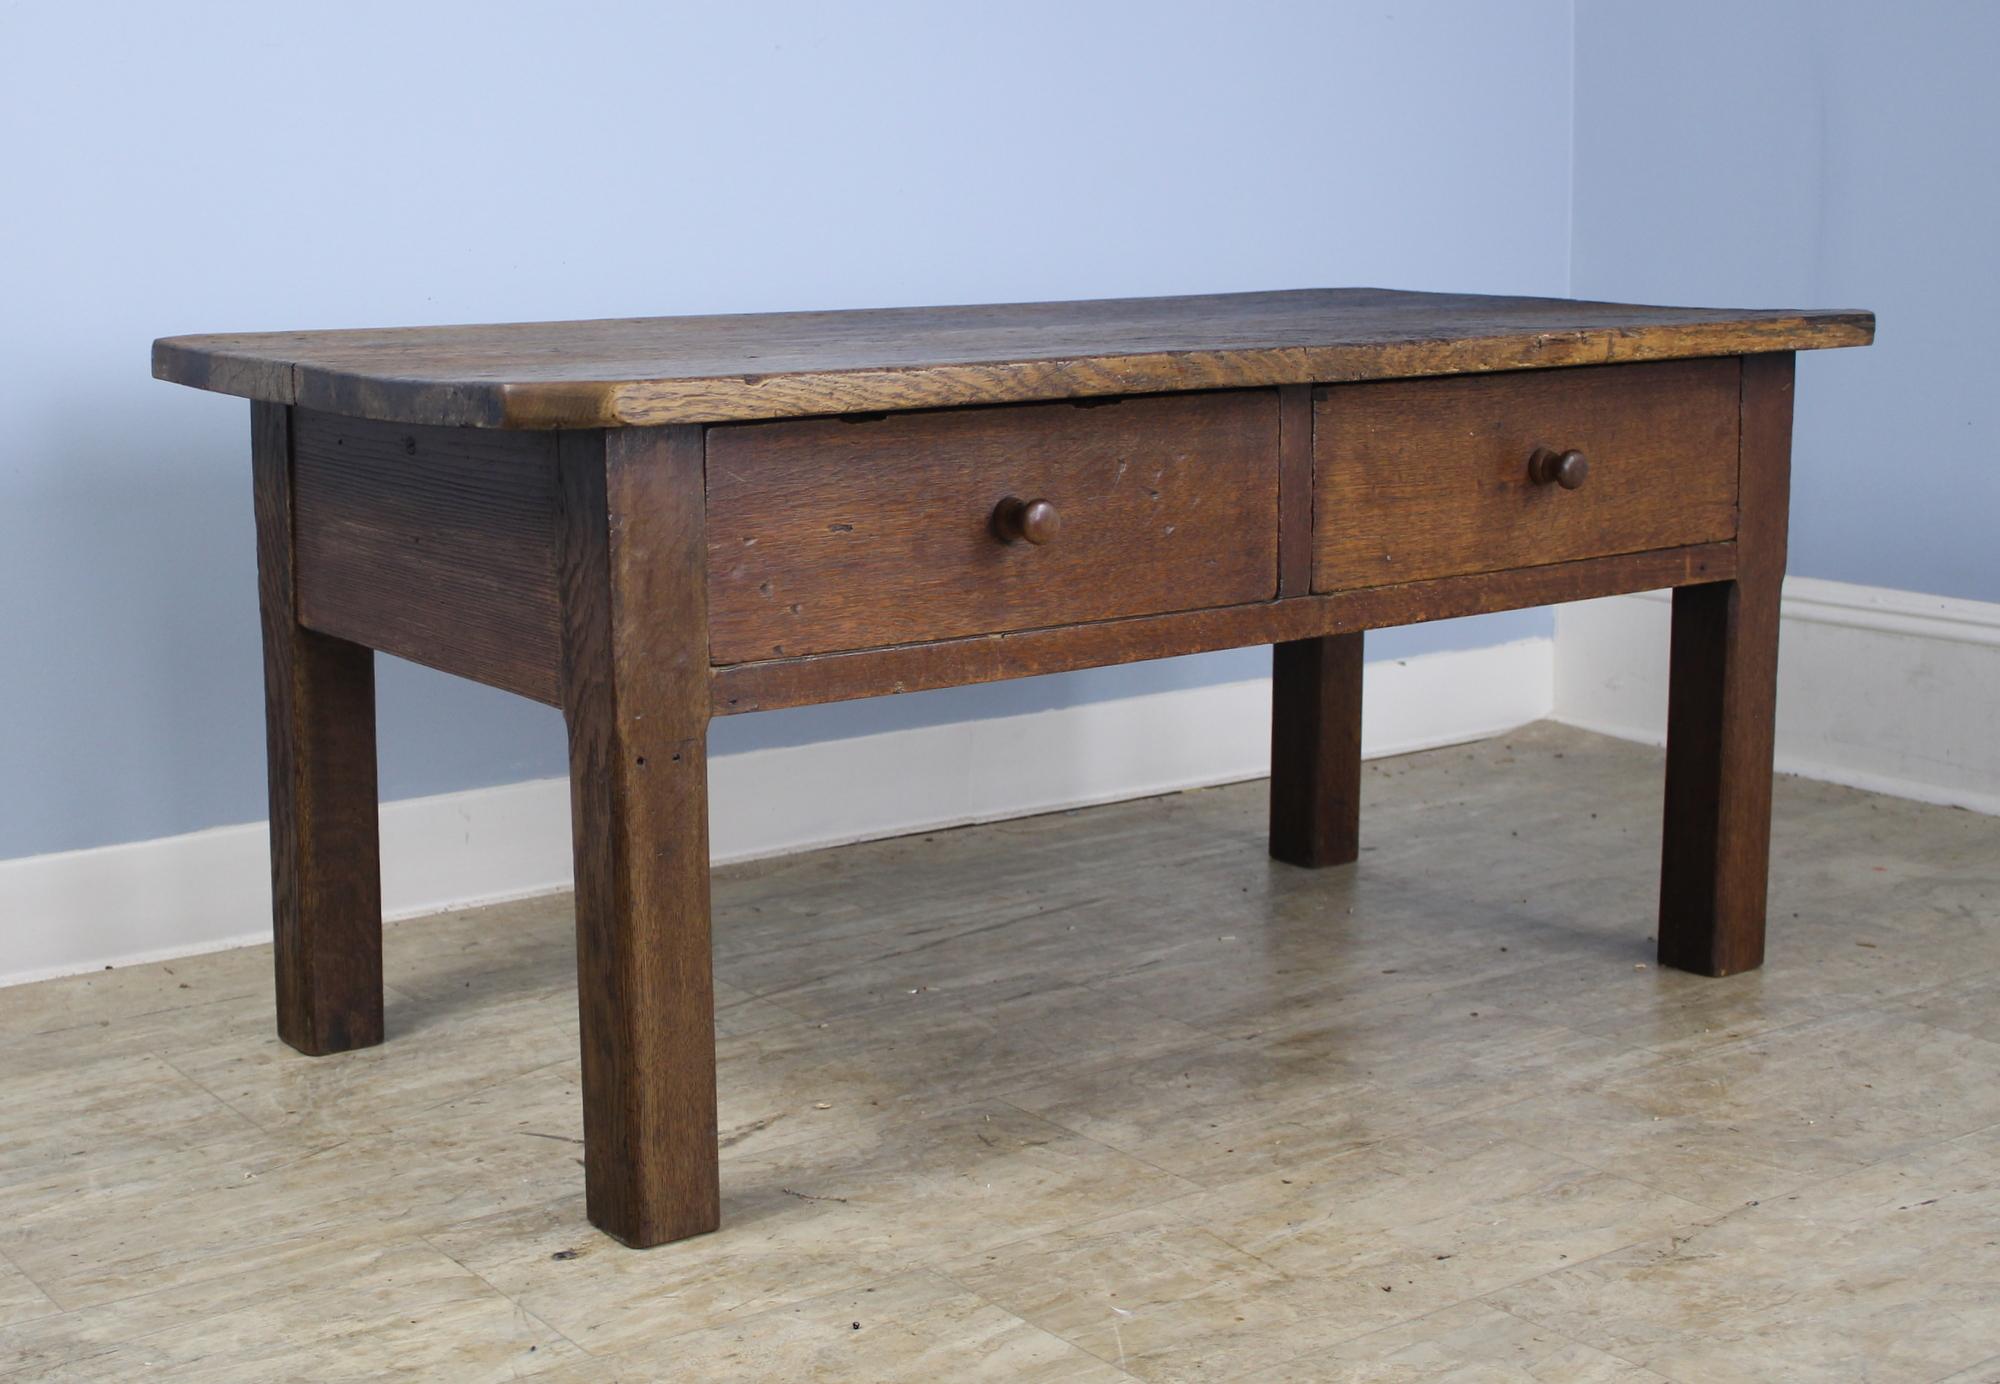 A dark oak coffee table with lots of interesting distress on the top and two roomy drawers. Other details of note are the chunky straight legs and the chamfered corners. Very nice patina and a good country look.